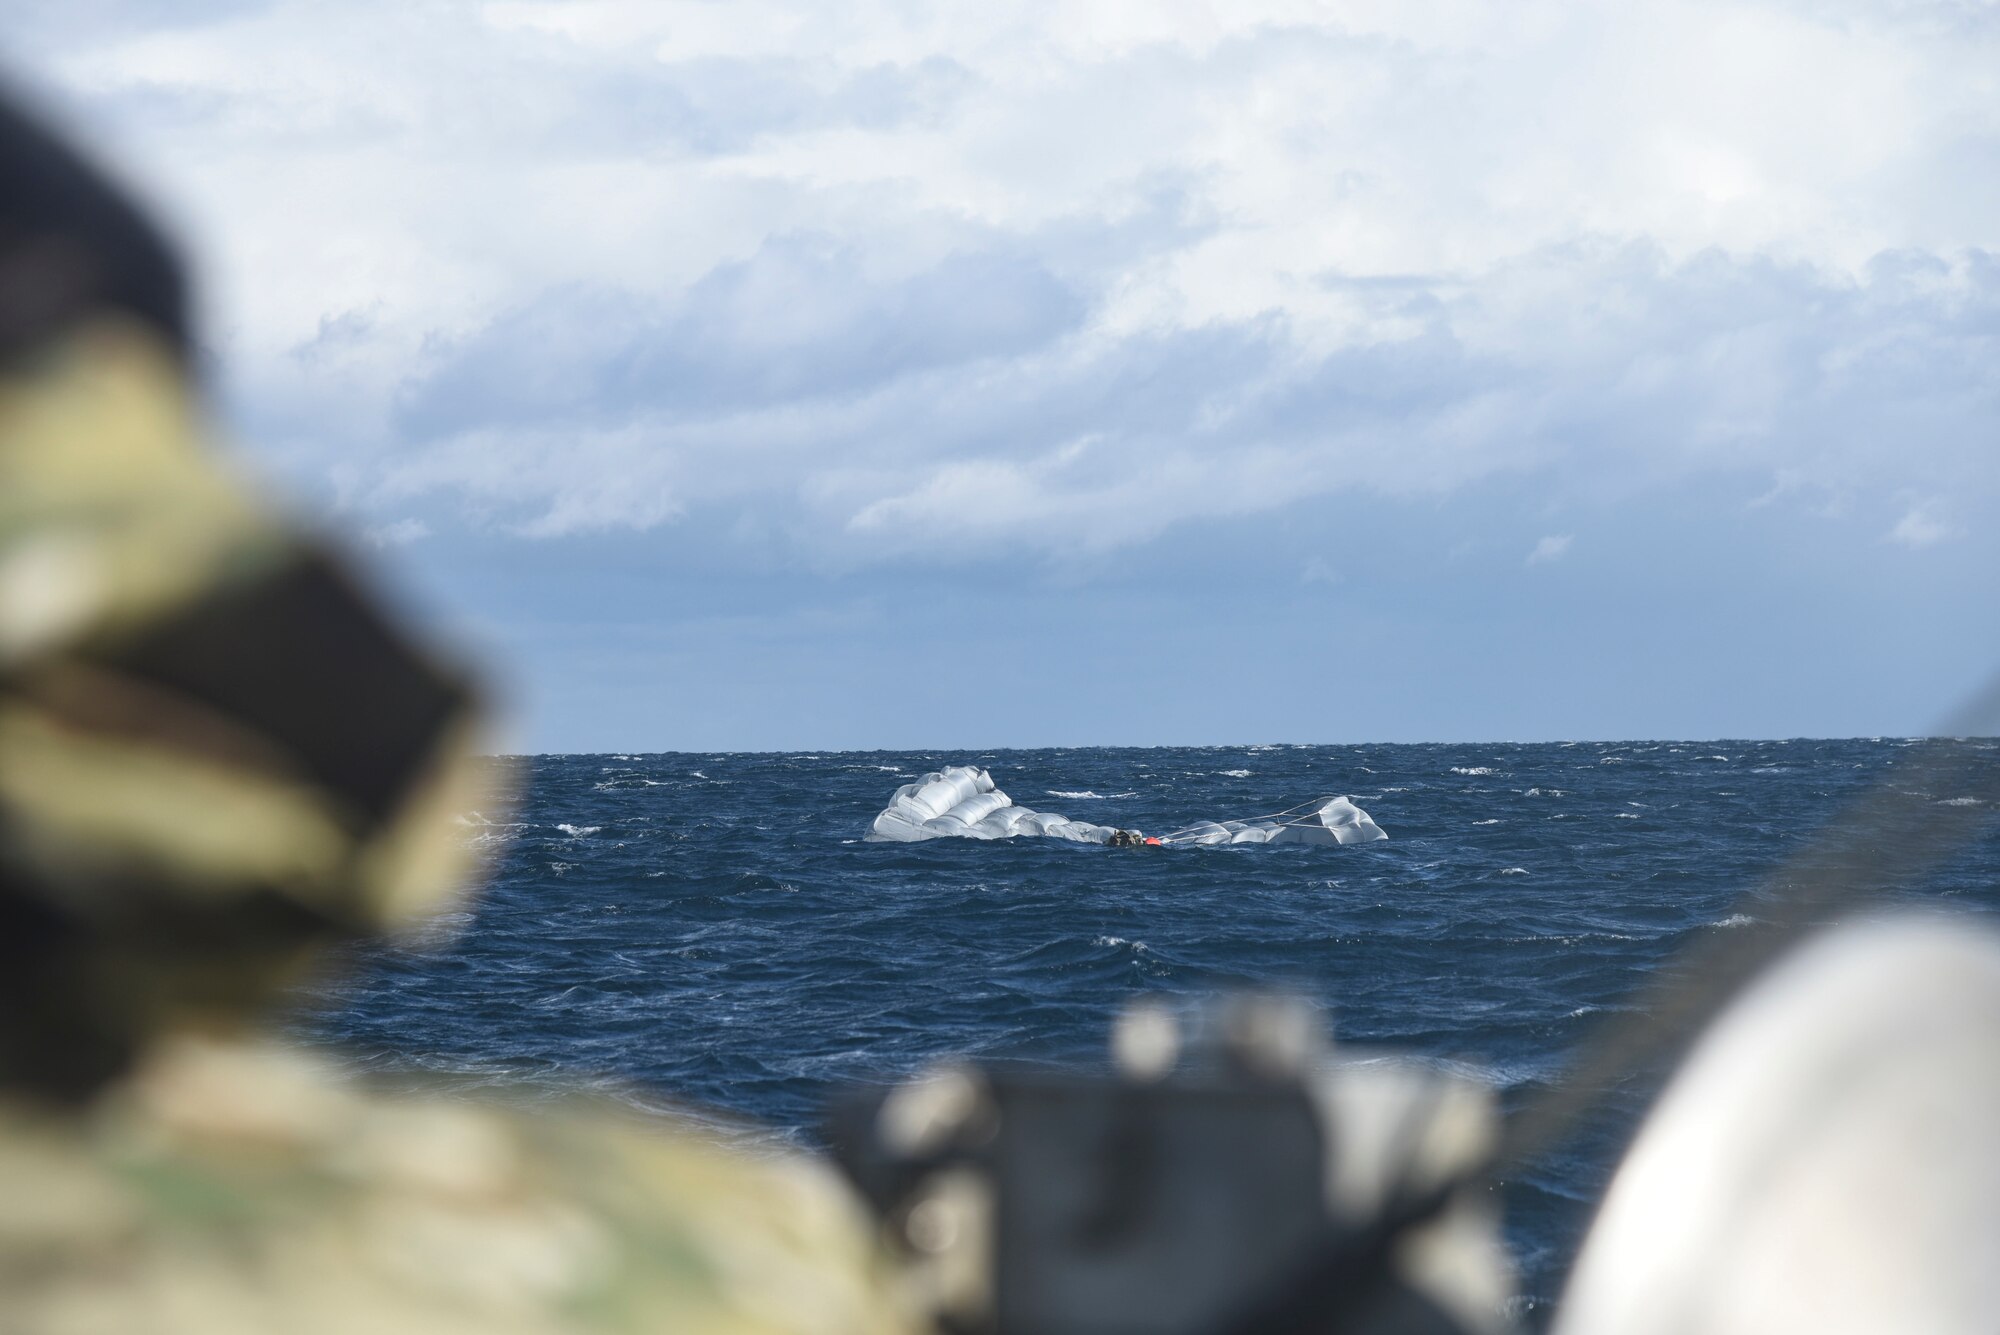 A U.S. Air Force pararescue specialist makes his way toward a Misawa City fishing boat for a combat search and rescue training operation during exercise Keen Sword 19, near Misawa Air Base, Japan, Oct. 31, 2018. The training ensured members of the 31st Rescue Squadron with Kadena Air Base, Japan, could tactfully locate and rescue a downed pilot in a simulated combat area. The U.S.-Japan mutual security treaty is a symbol of the U.S. commitment to Japan and the region and allows the United States to provide forward-deployed forces that can rapidly respond to counter aggression against Japan and other regional allies and partners. (U.S. Air Force photo by Senior Airman Sadie Colbert)